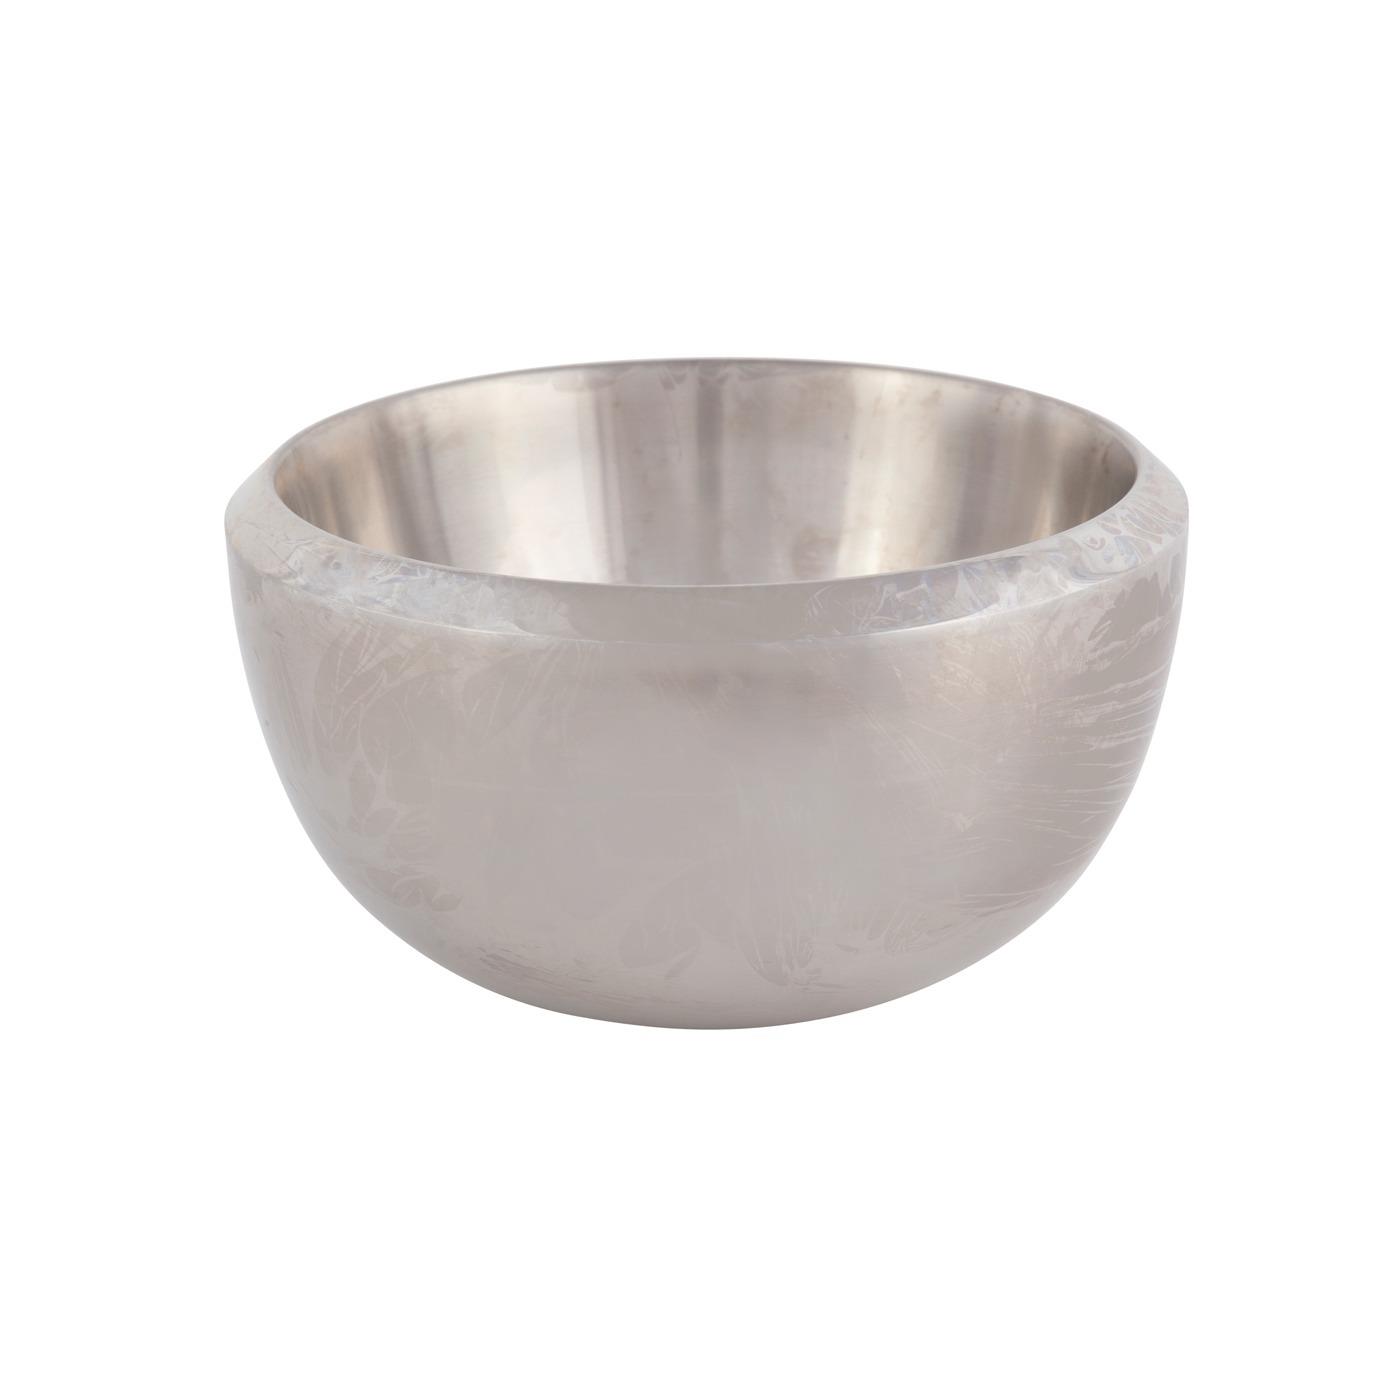 Stainless Steel Round Double Wall Bowl - 8"